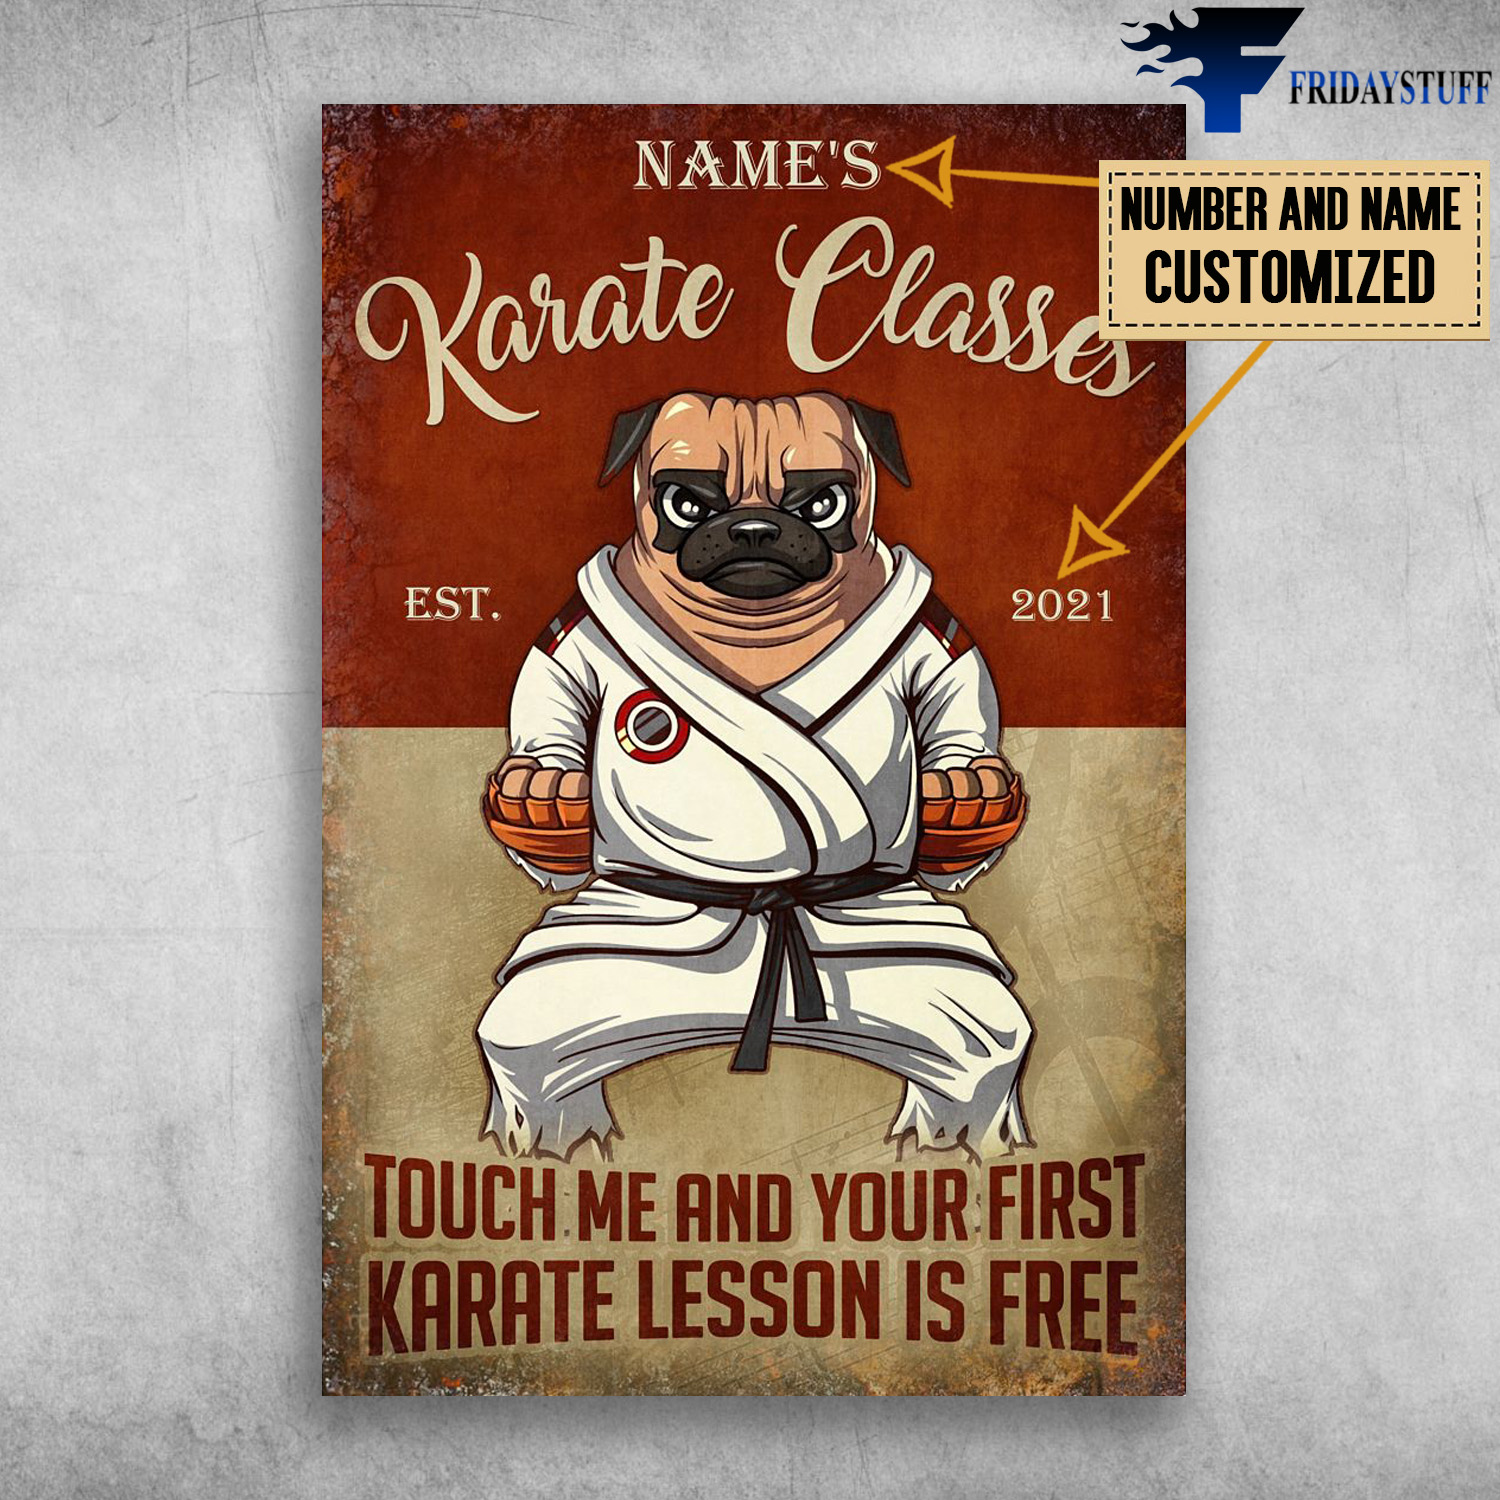 Karate Classes, Touch Me And Your First, Karate Lesson Is Free